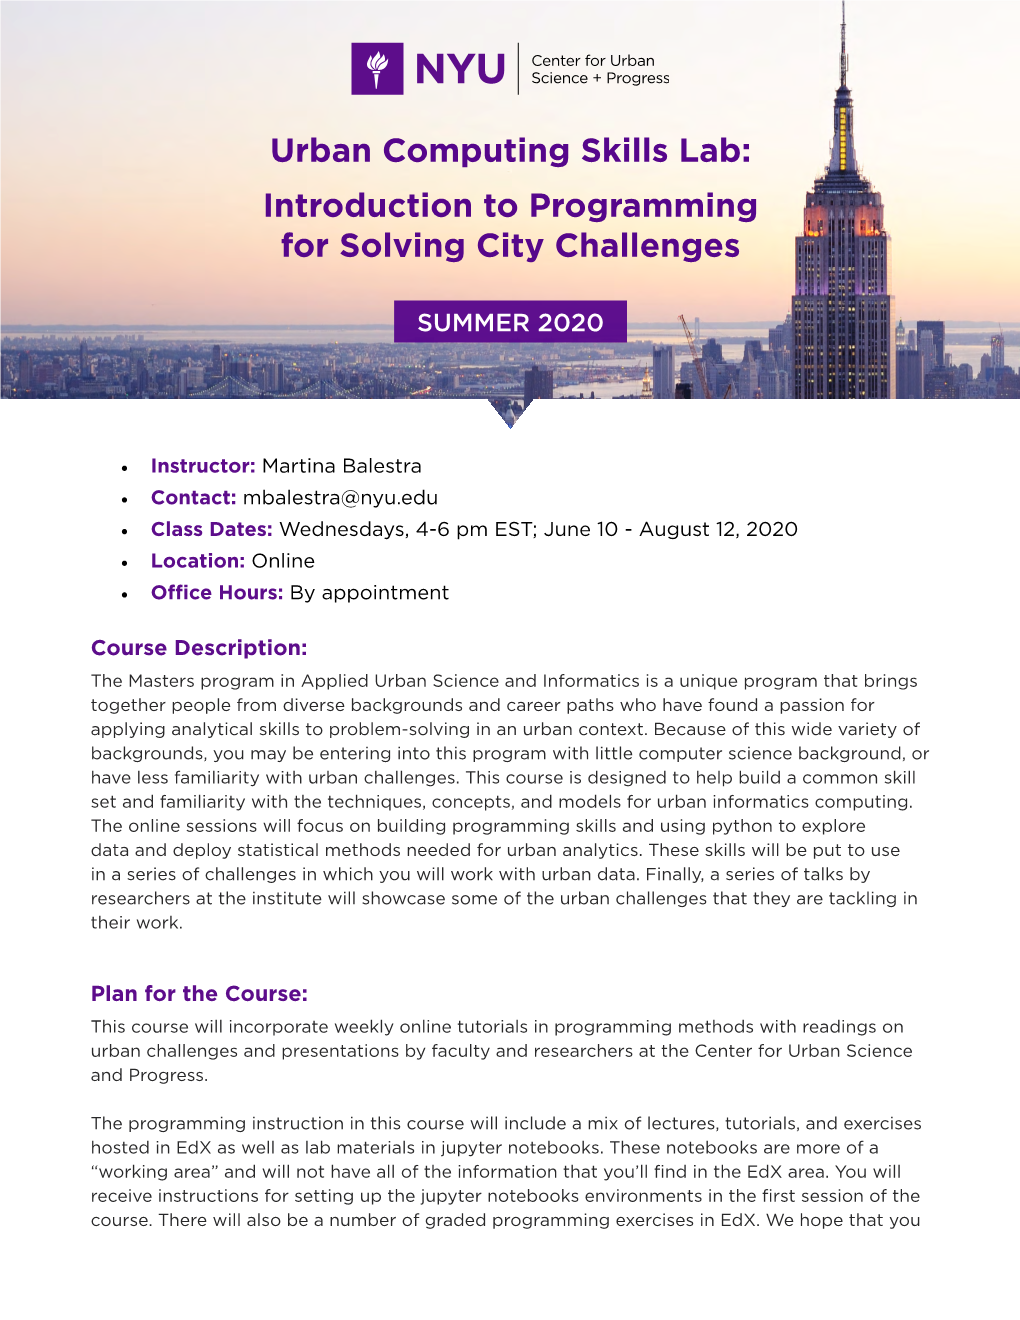 Urban Computing Skills Lab: Introduction to Programming for Solving City Challenges